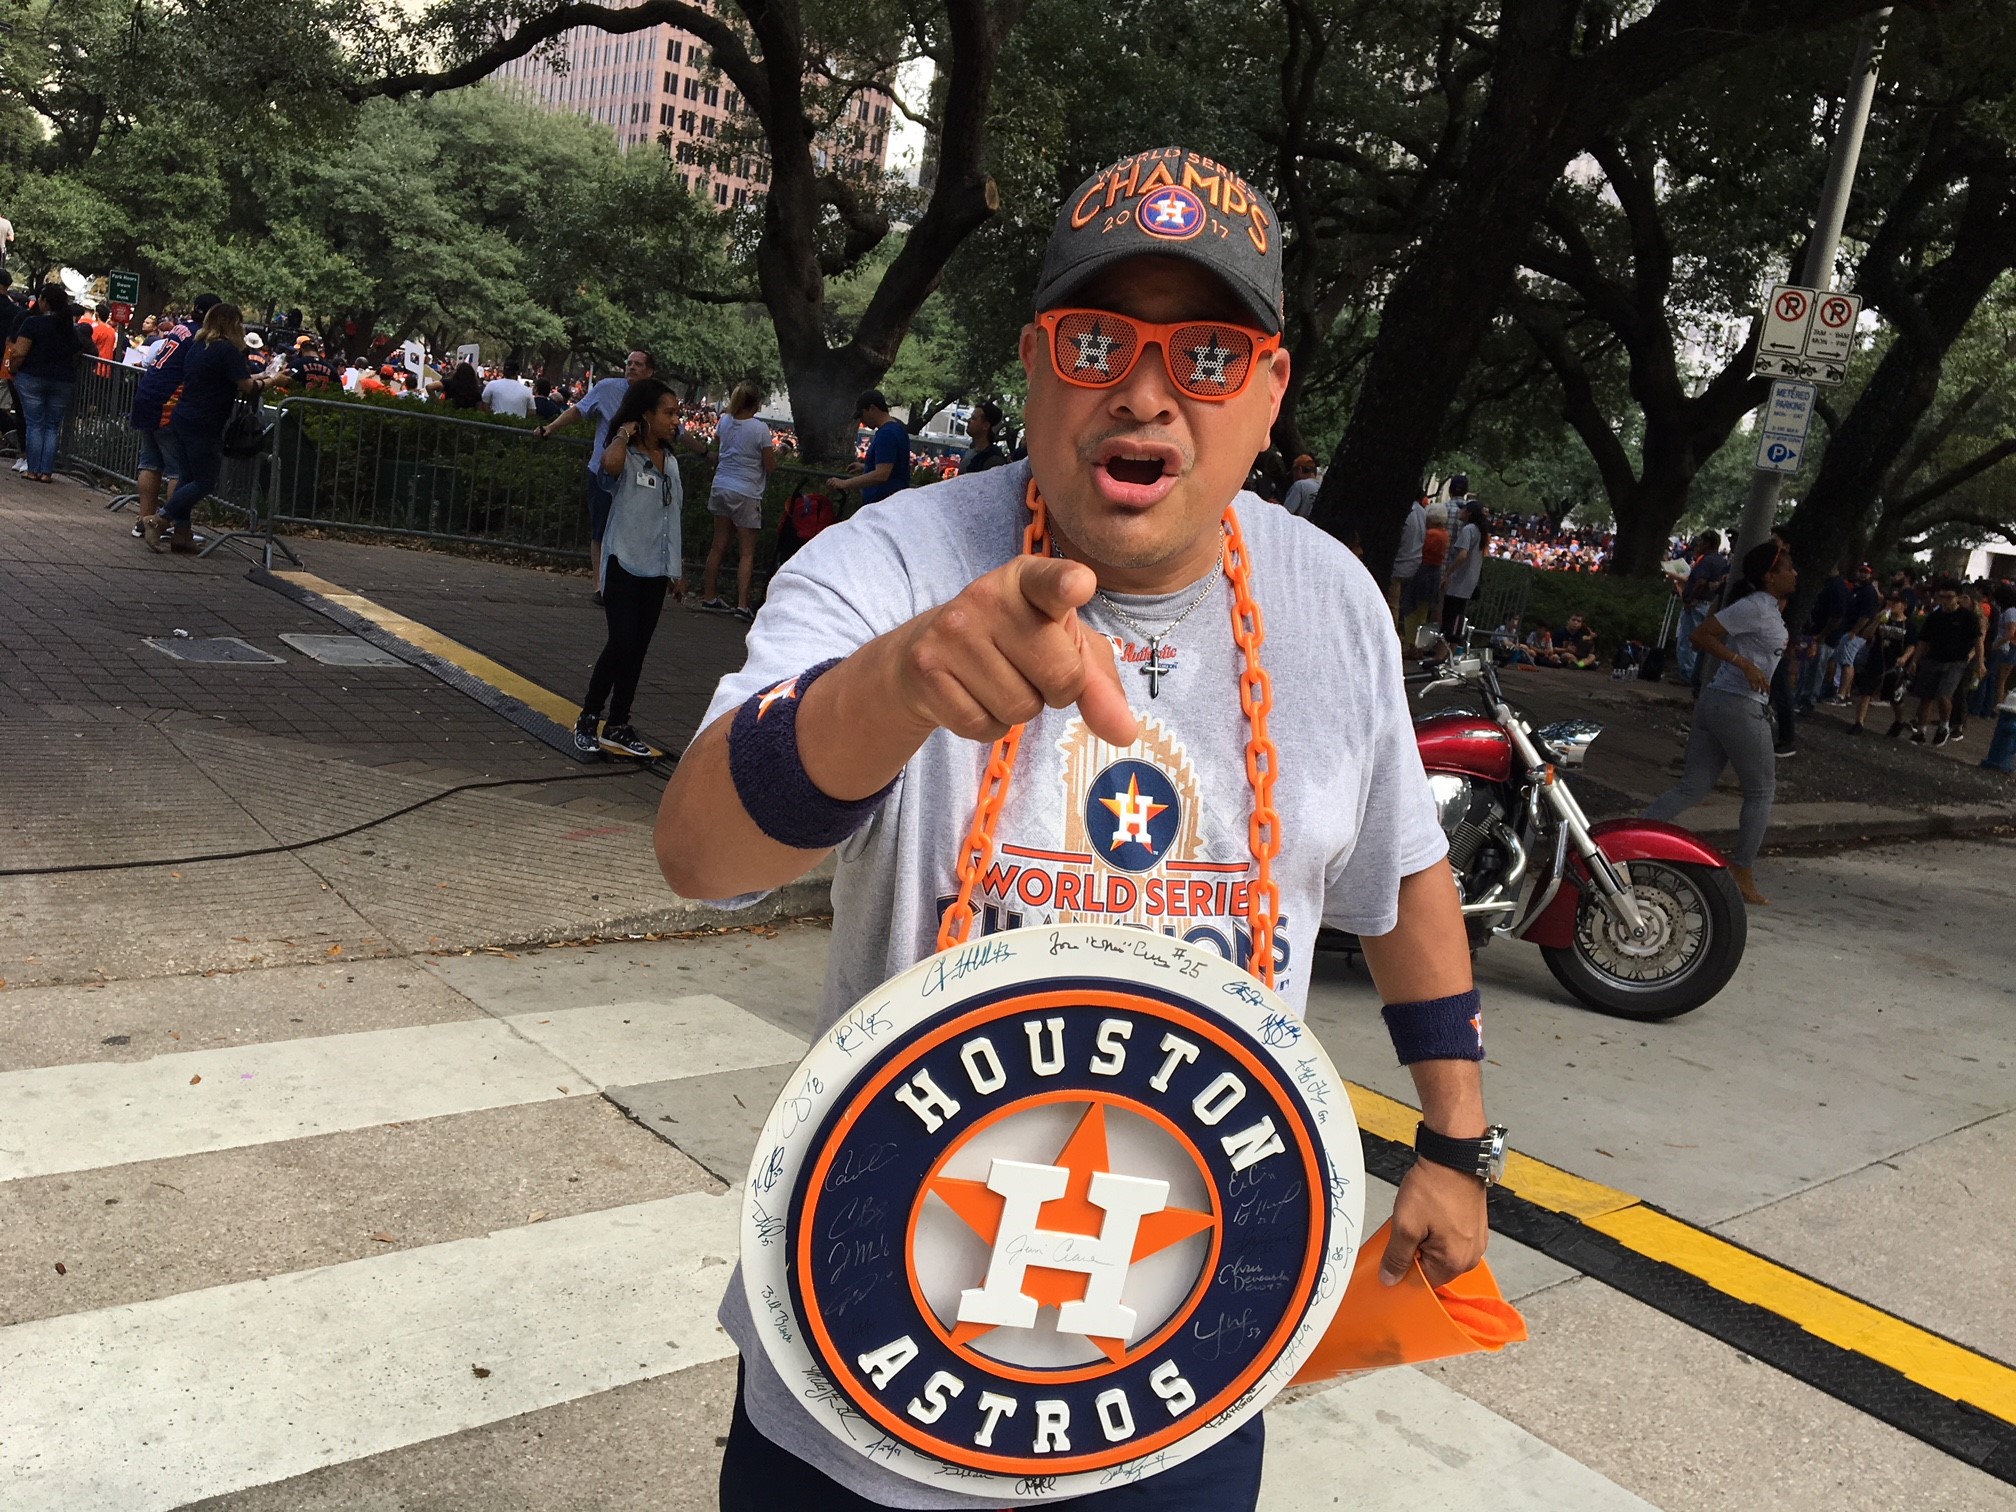 Meet the Astros fan already in line for the World Series victory parade